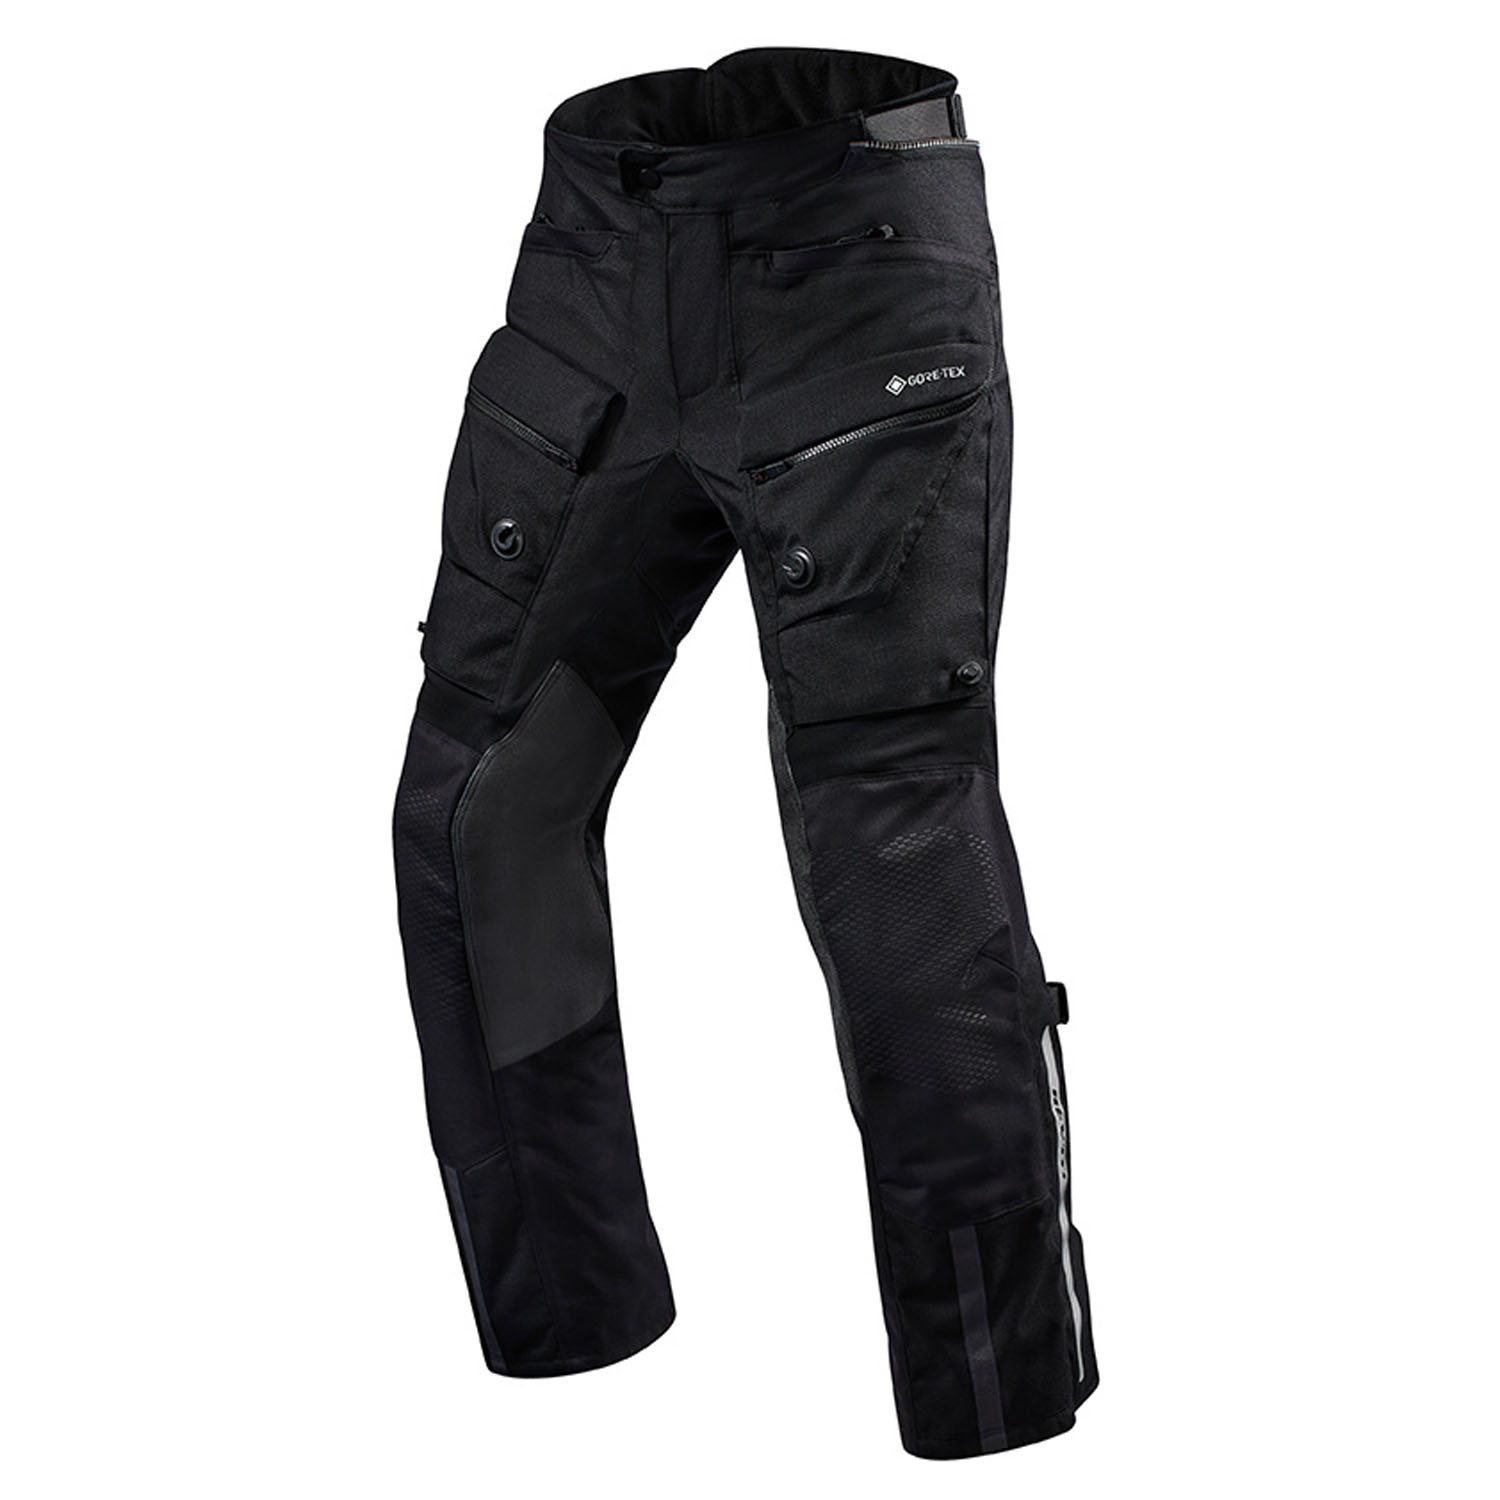 Image of REV'IT! Trousers Defender 3 GTX Black Long Motorcycle Pants Size XL ID 8700001319911